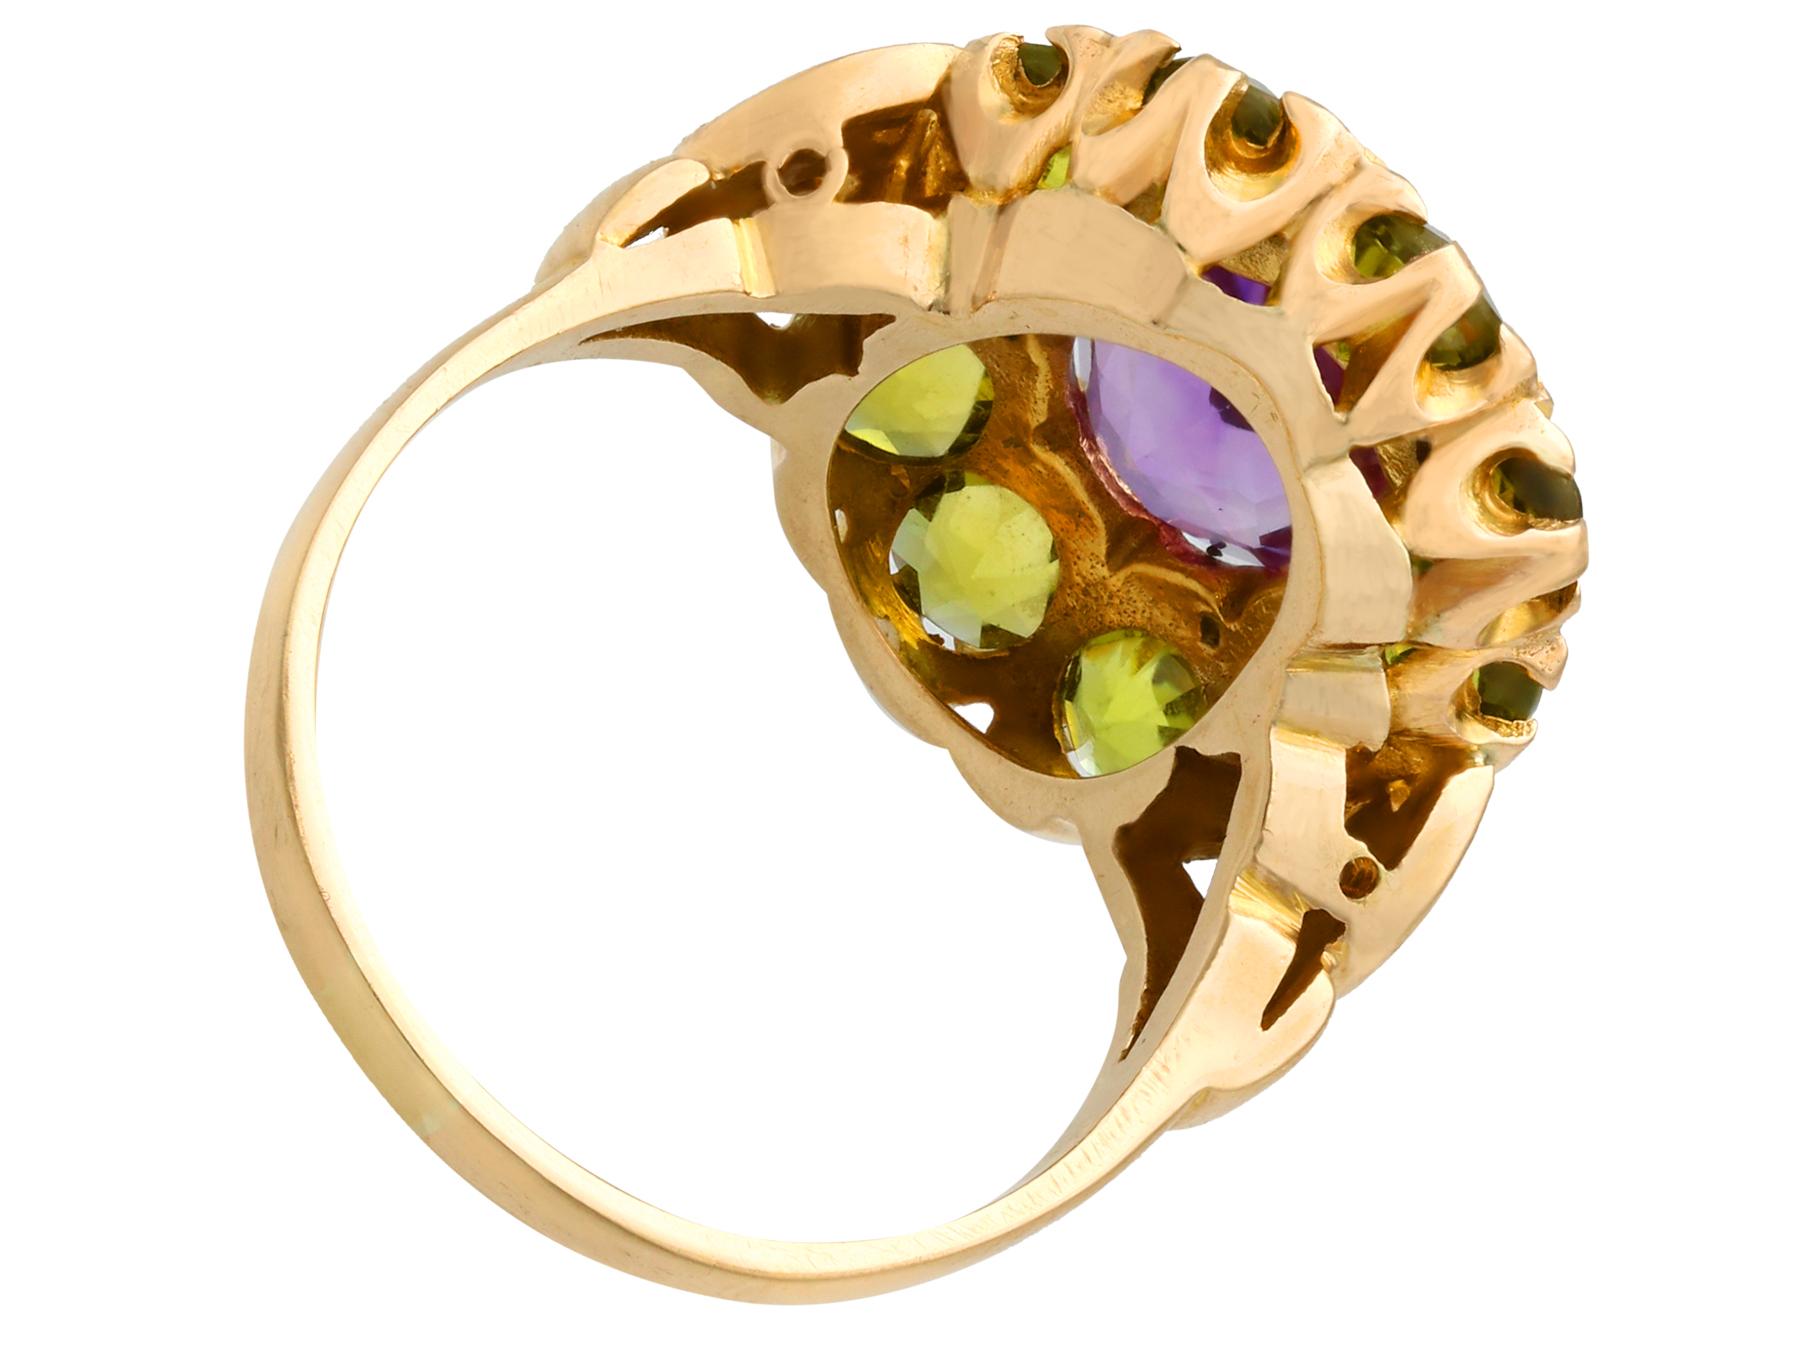 Oval Cut 2.41 Carat Amethyst and 2.56 Carat Peridot Yellow Gold Cocktail Ring Circa 1890 For Sale